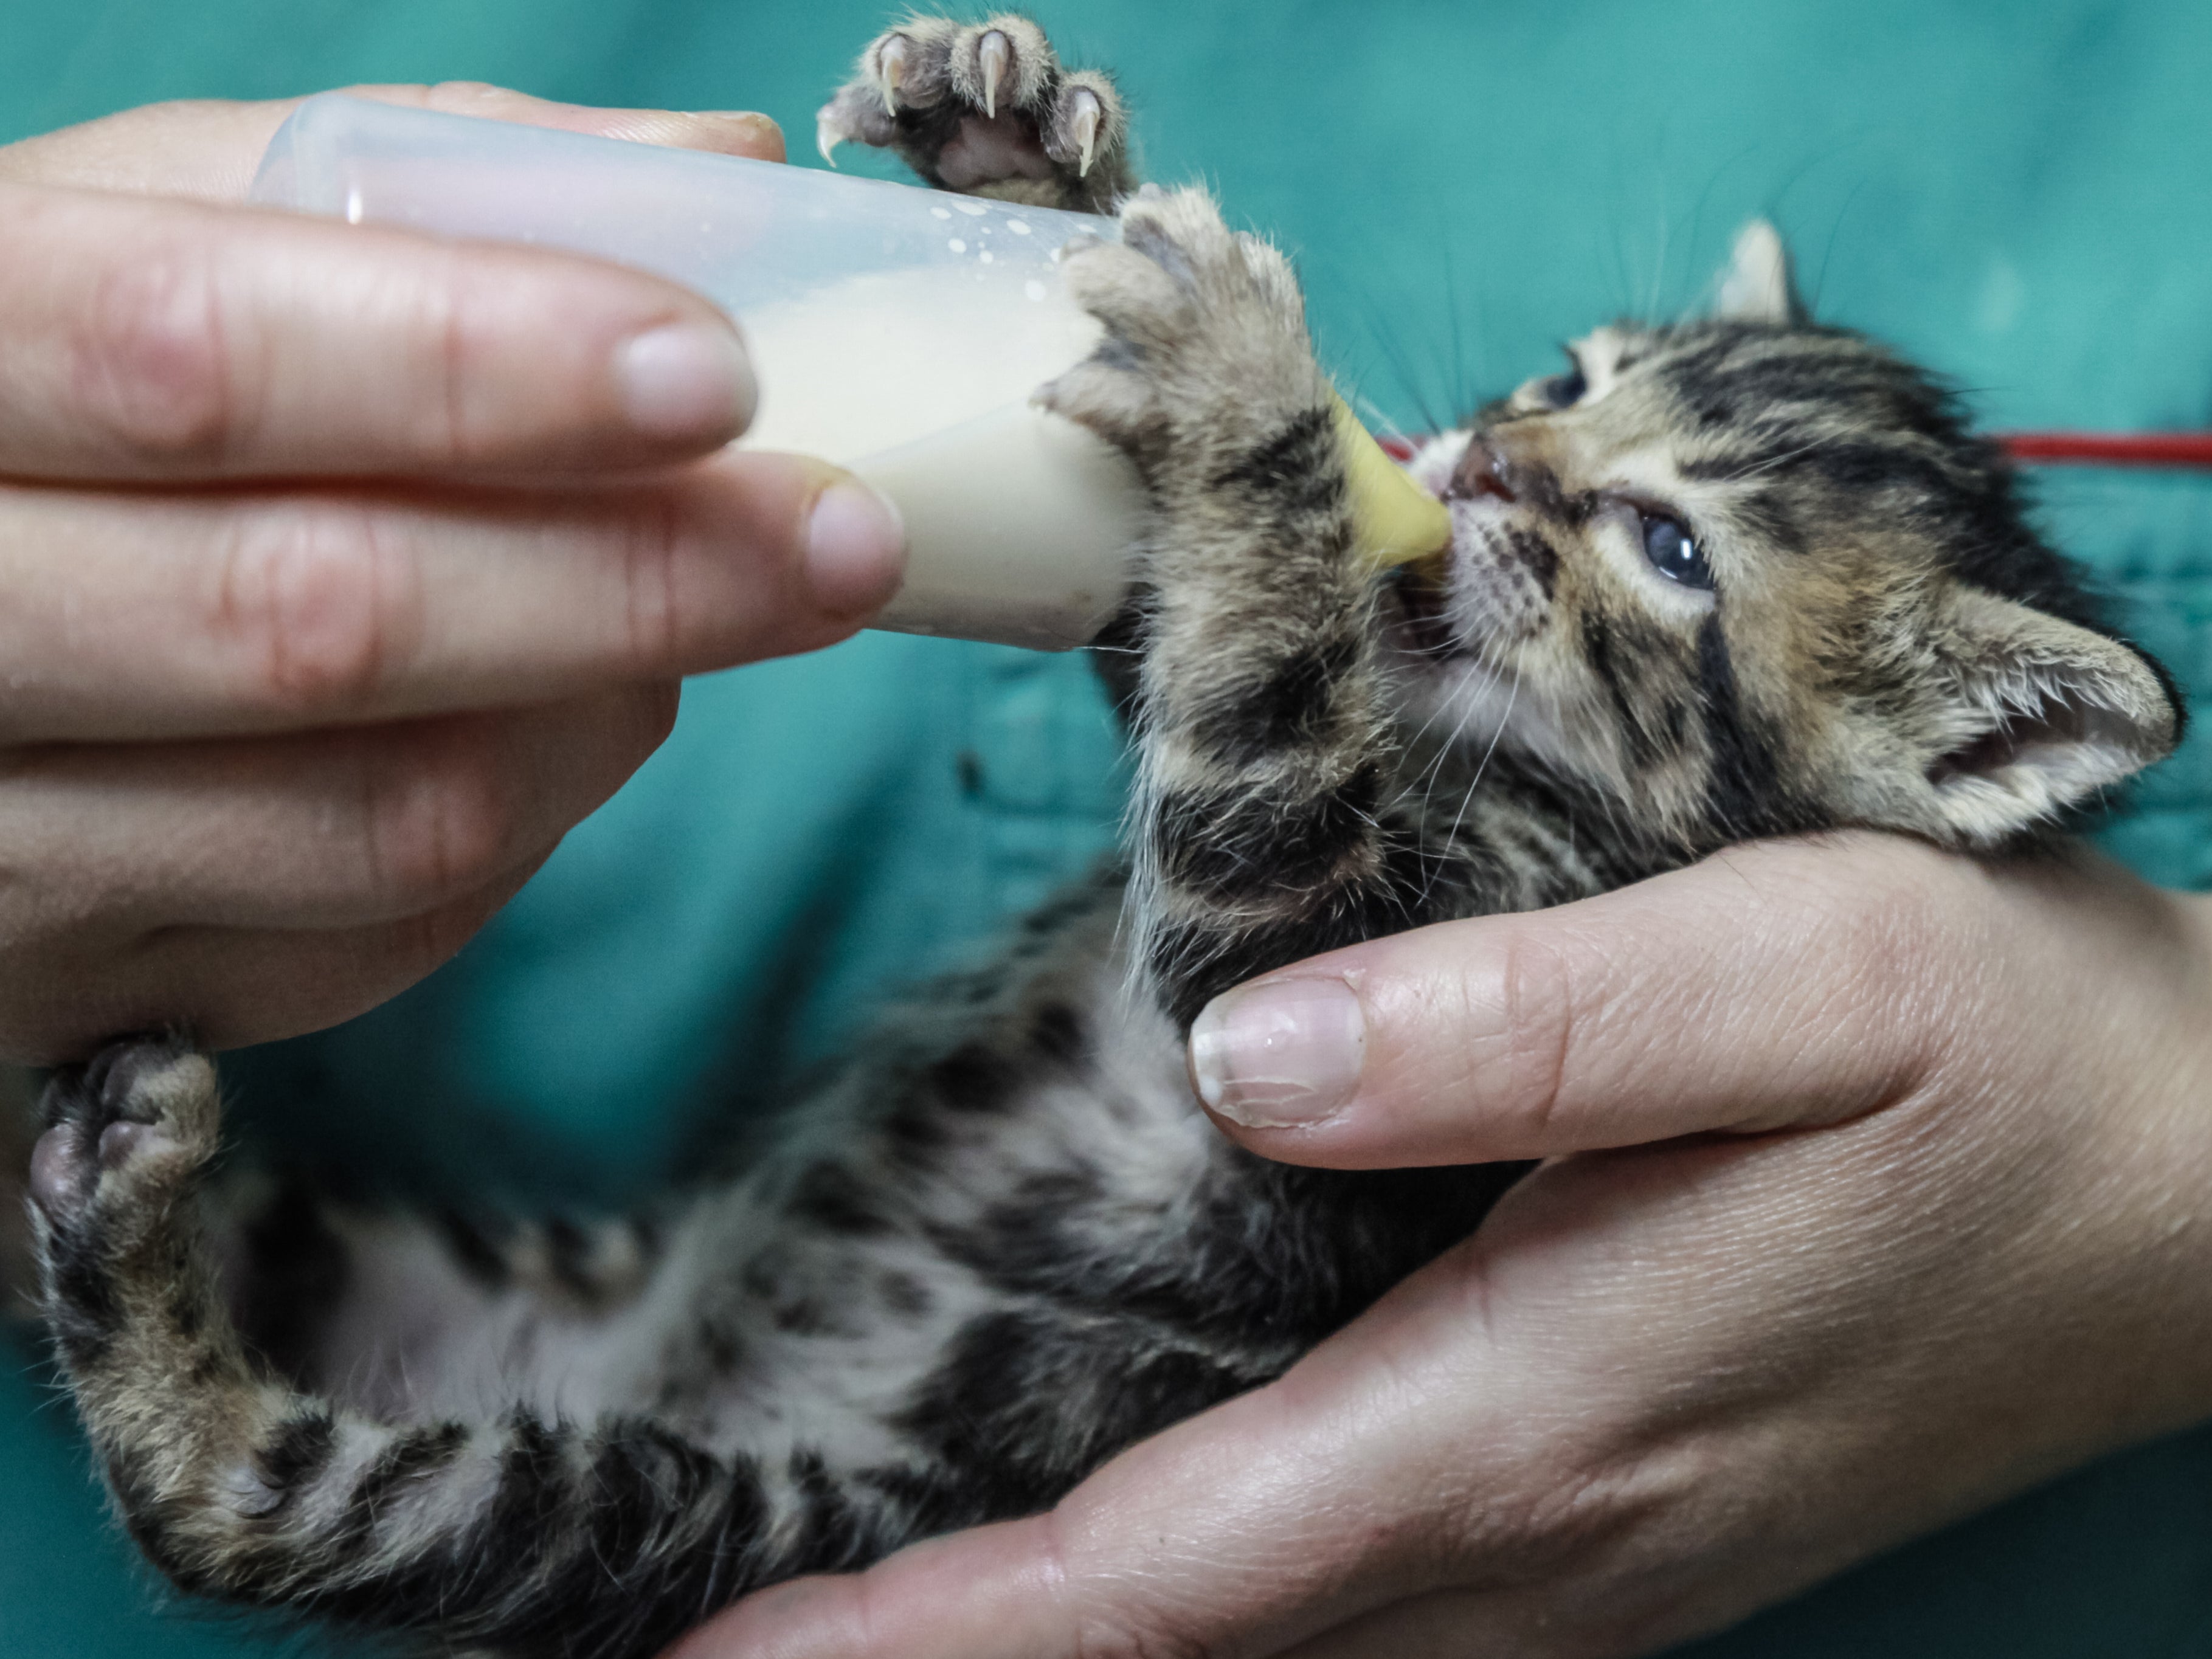 Kittens are sold sick or when they are too young to be separated from their mothers